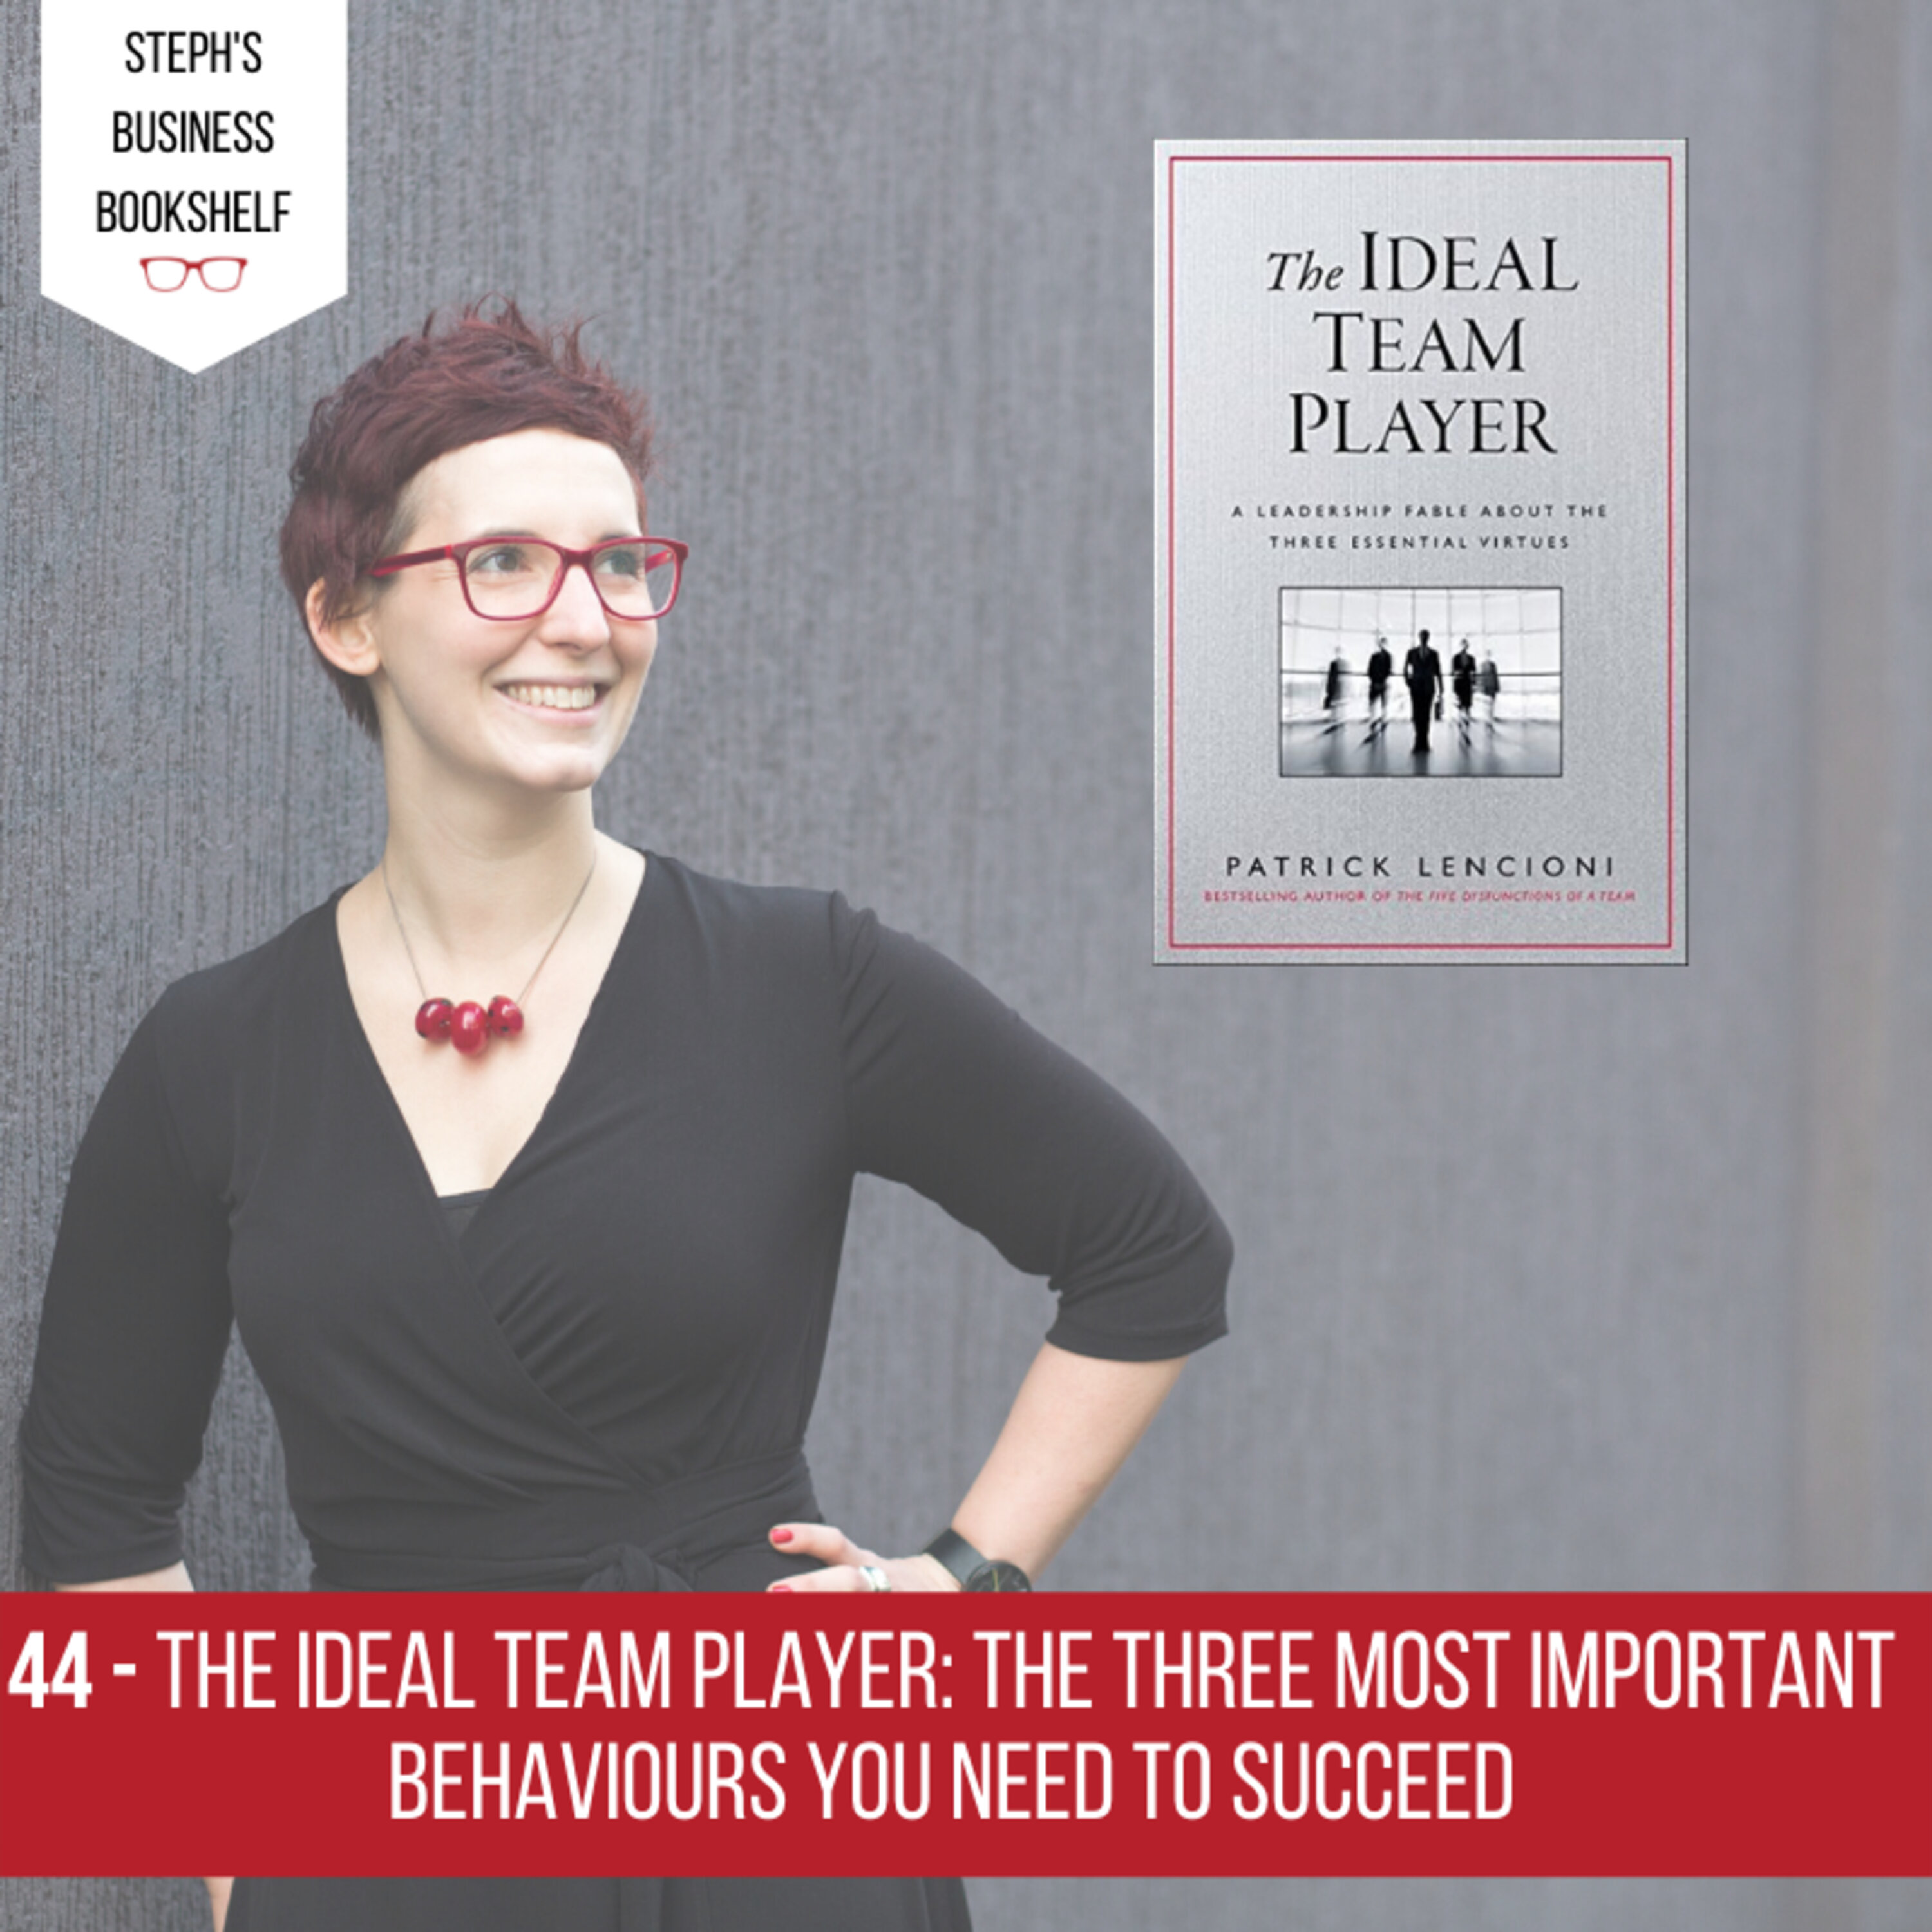 The Ideal Team Player by Patrick Lencioni: The Three Most Important Behaviours You Need To Succeed